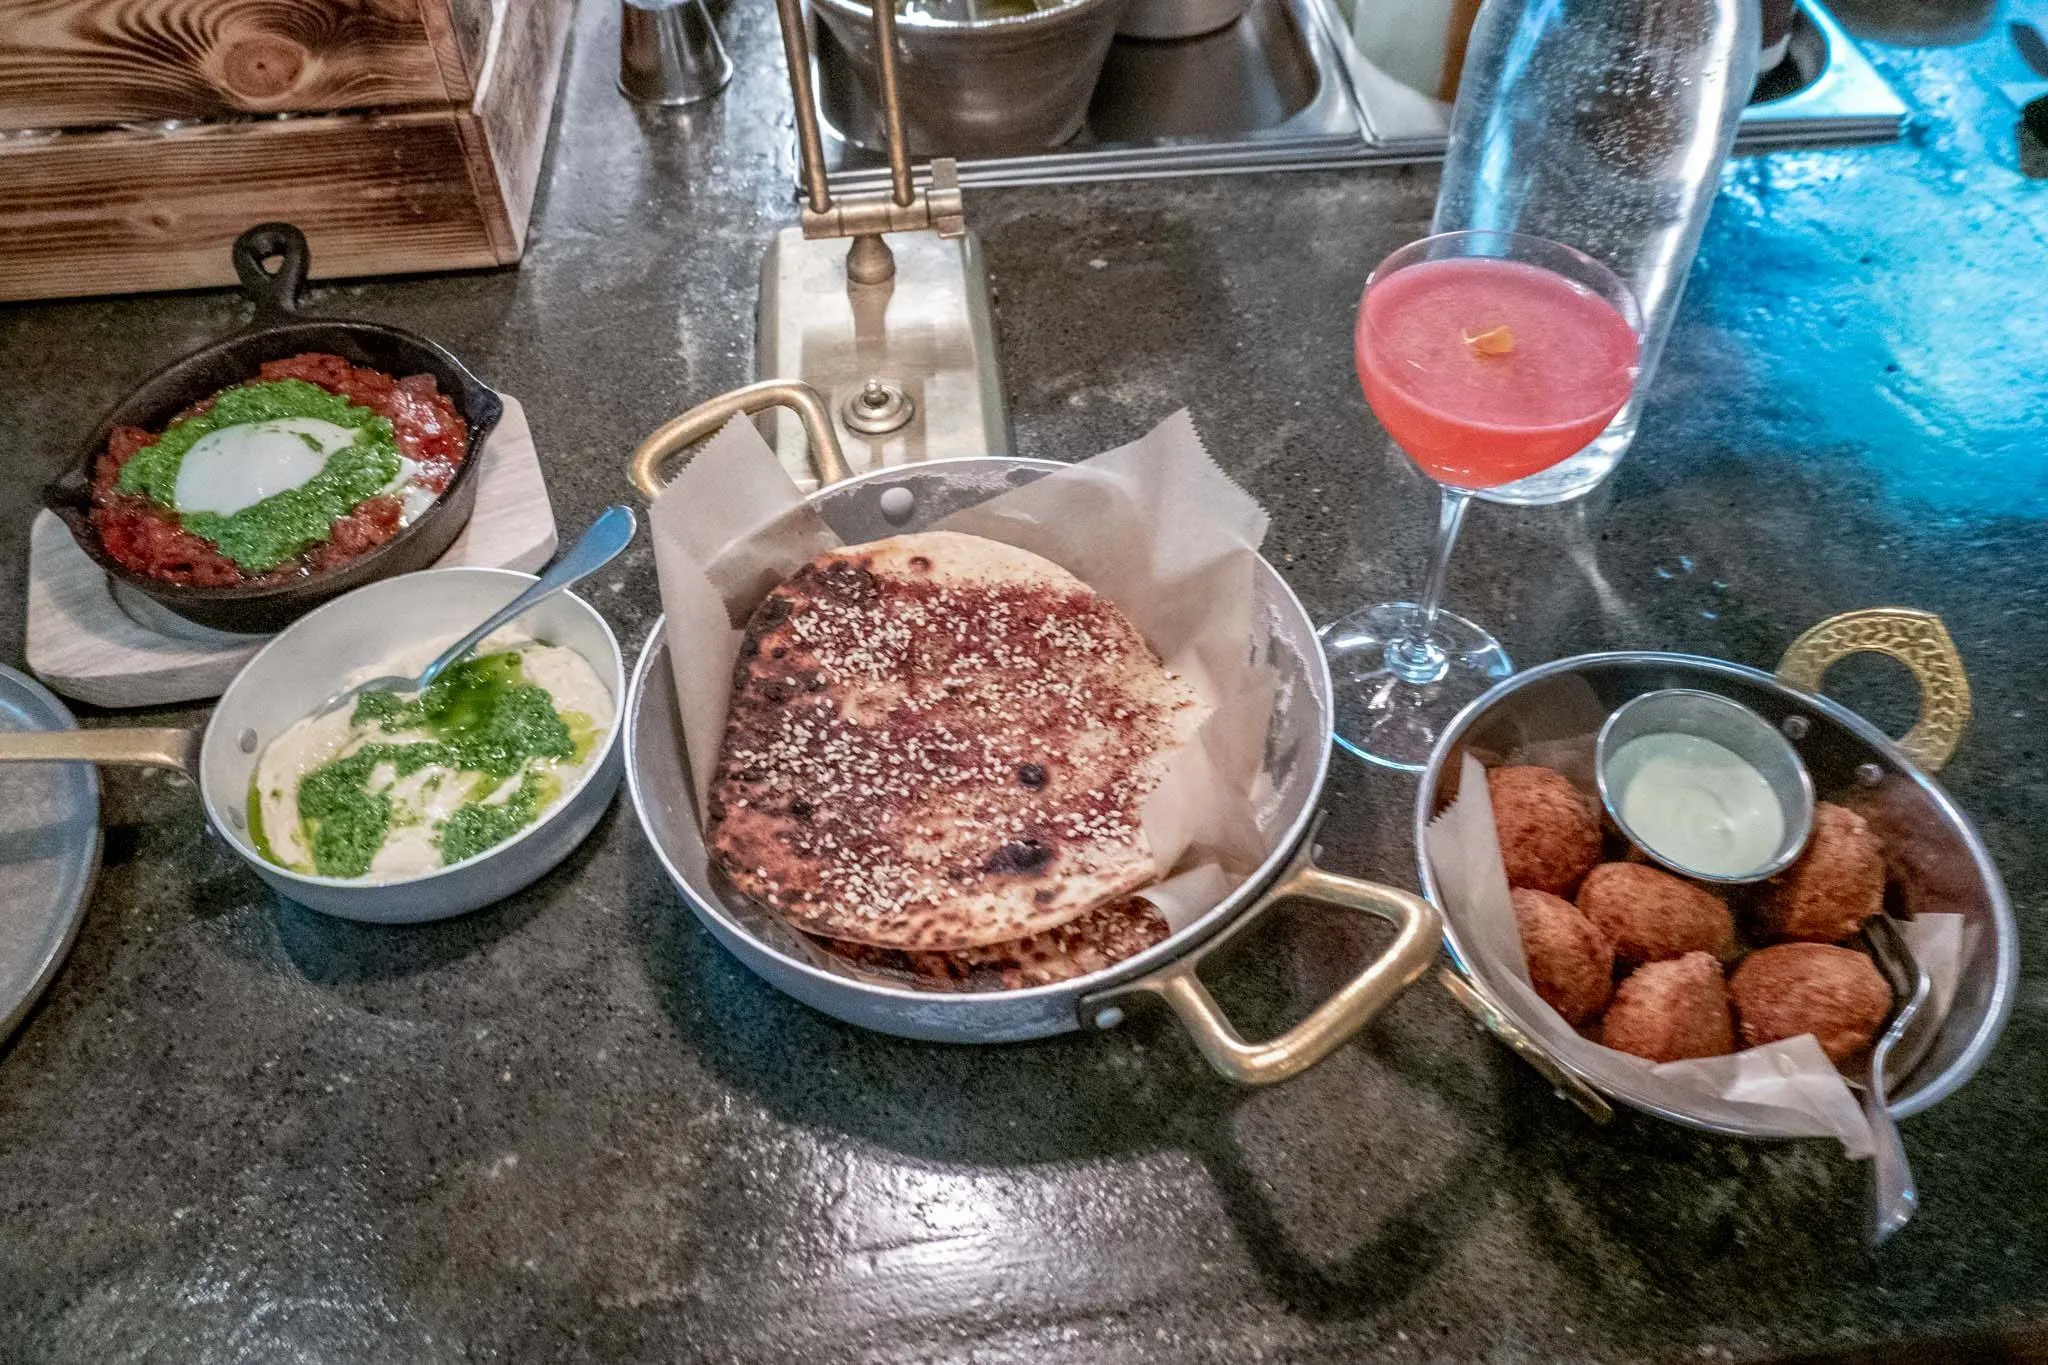 Pita, hummus, a cocktail, and other dishes on a counter.